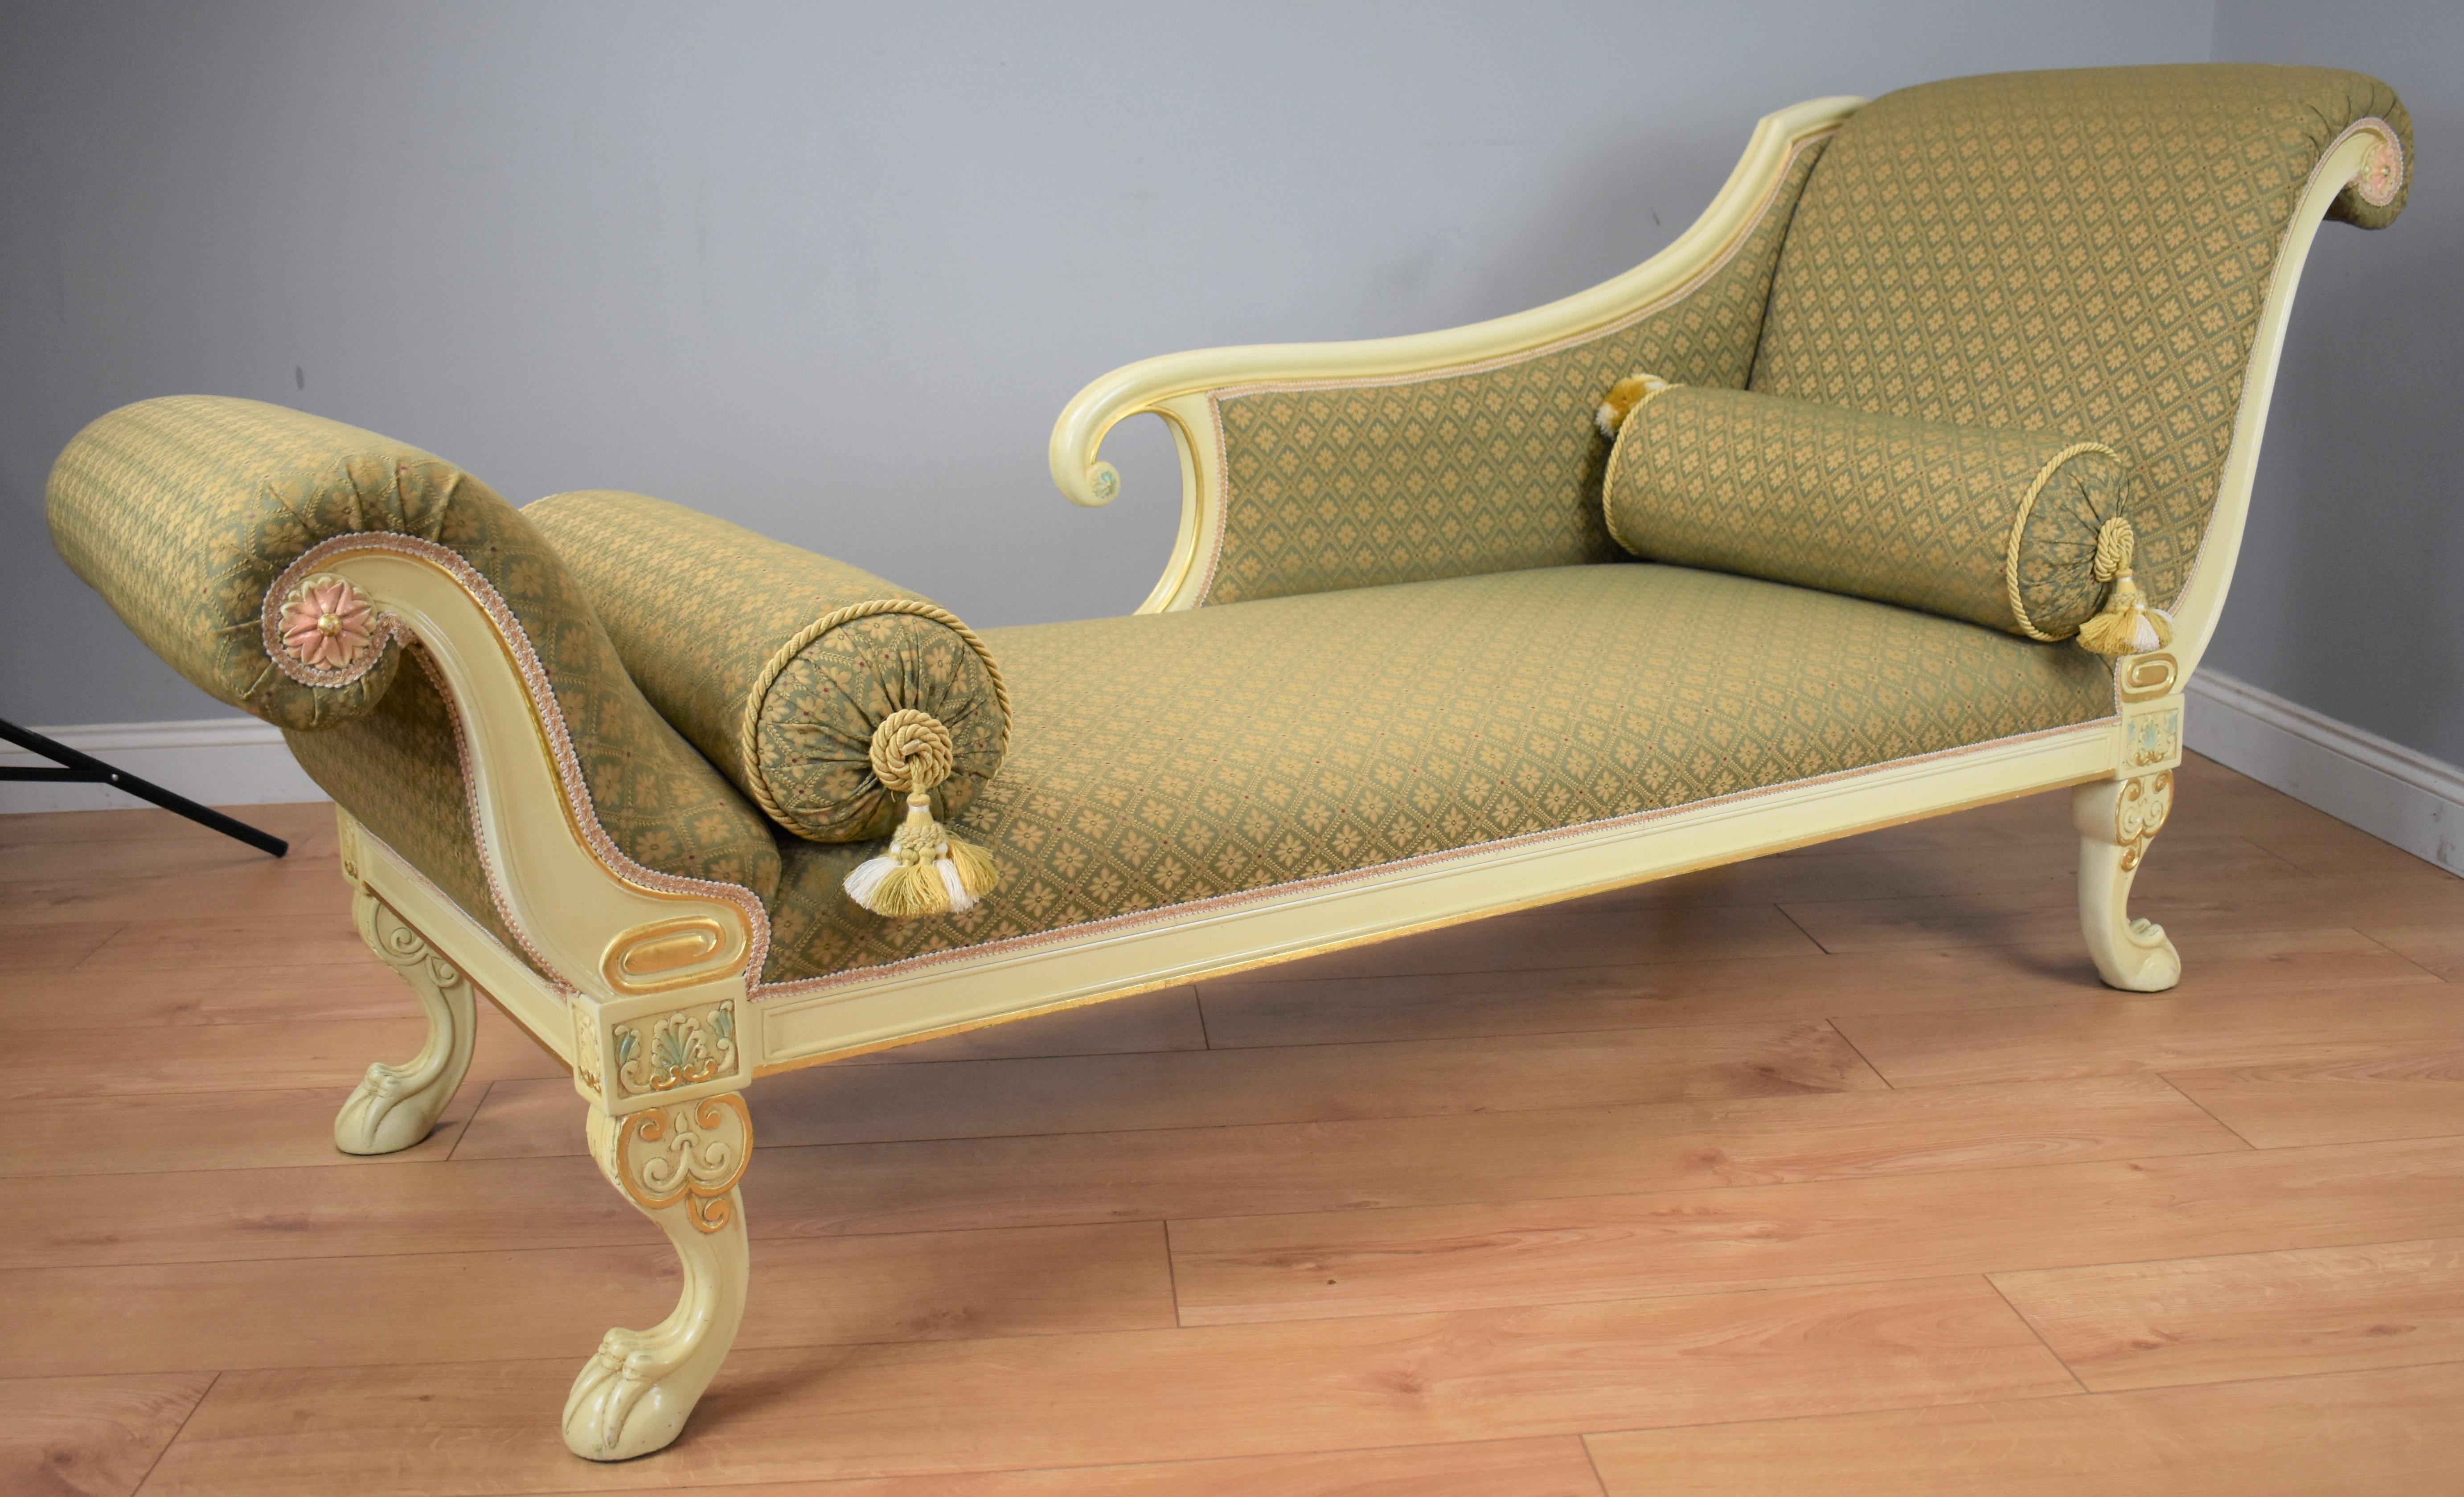 20th century large Victorian style painted chaise lounge in very nice condition with scroll ends with detailed flower to centre standing on claw feet. The upholstery is in good condition having been recently upholstered in a green patterened fabric,